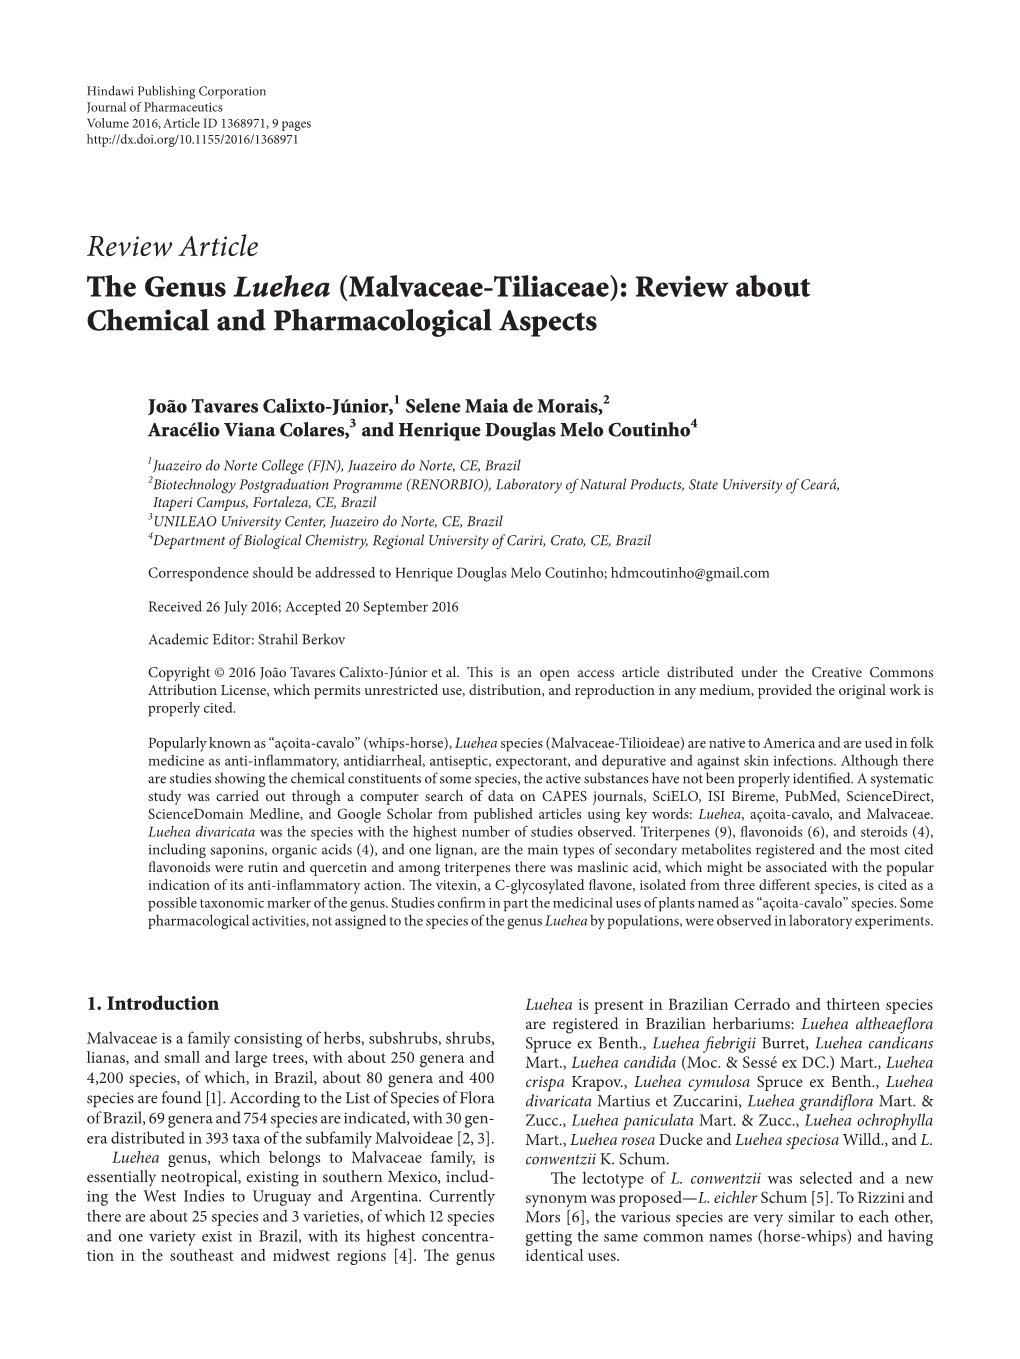 The Genus Luehea (Malvaceae-Tiliaceae): Review About Chemical and Pharmacological Aspects